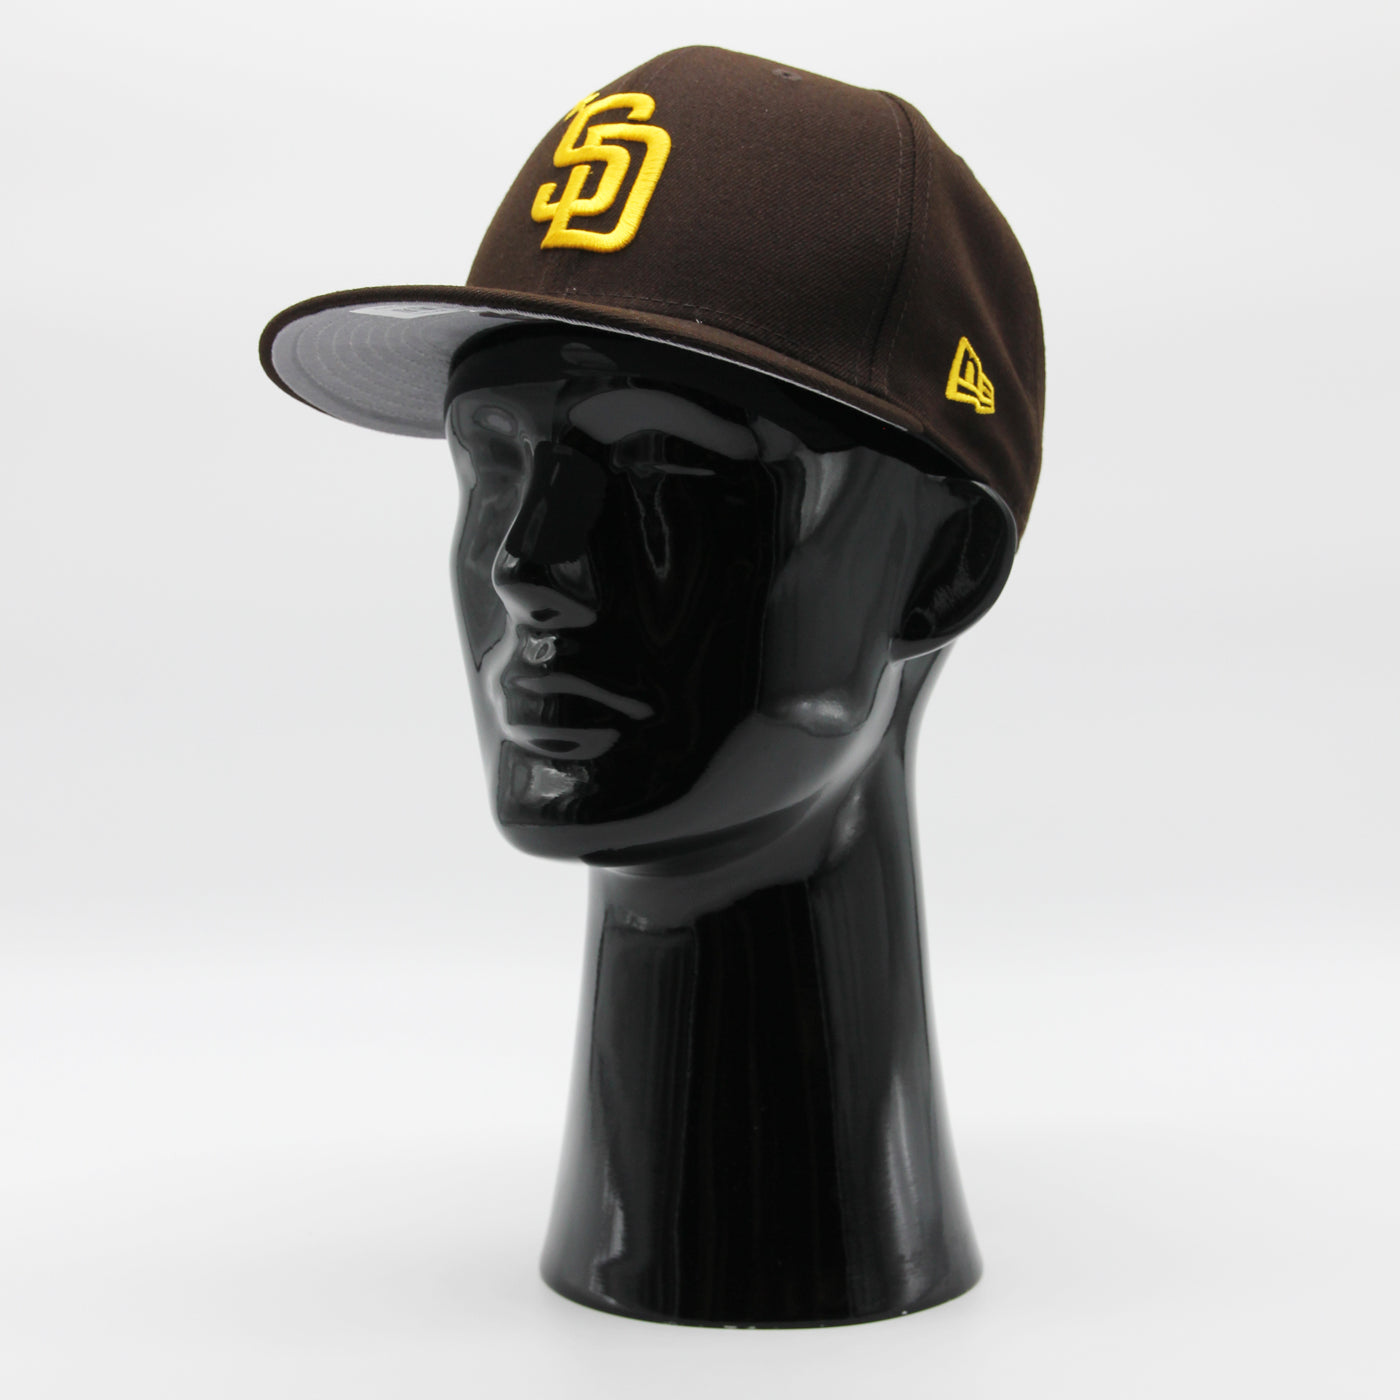 New Era MLB All Star Game Workout 9Fifty SD Padres brown